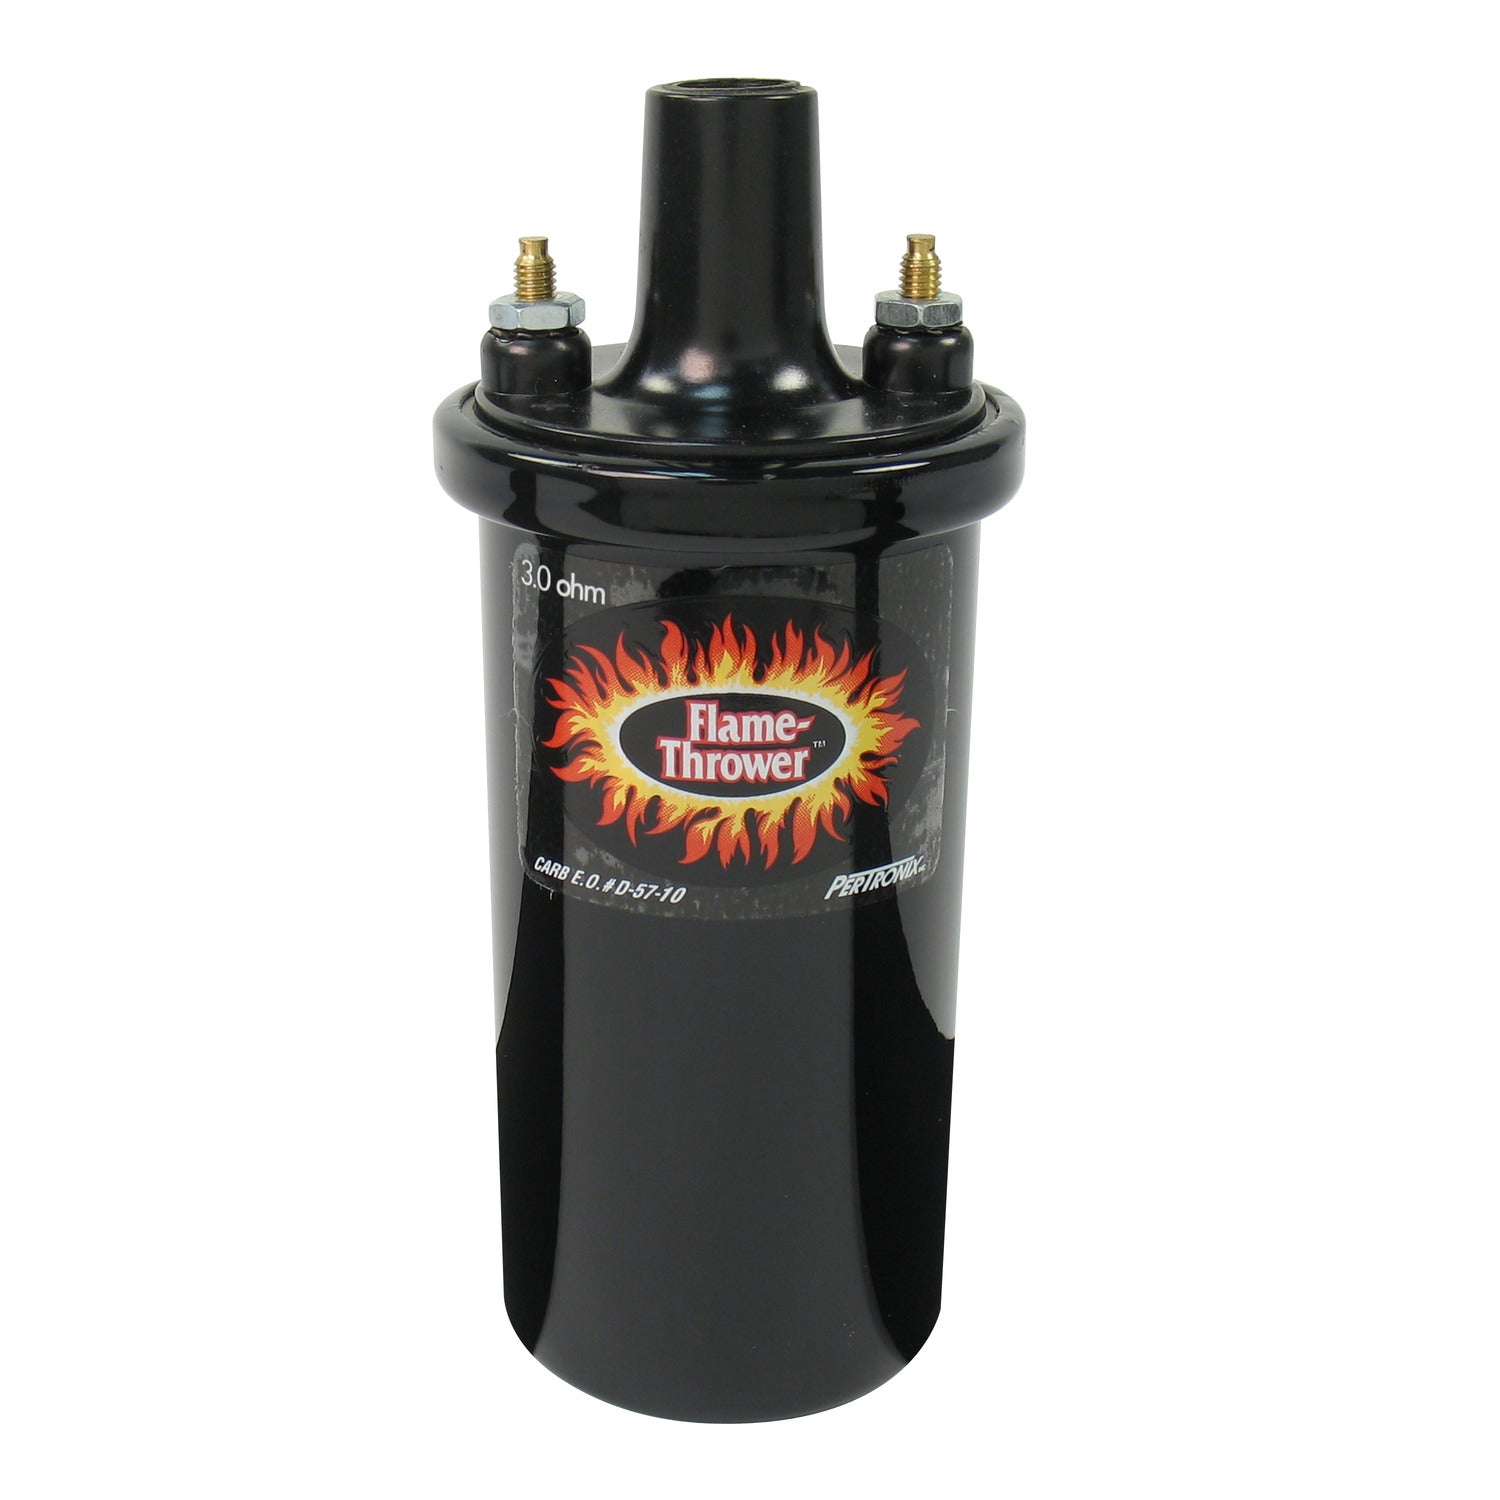 PerTronix 40511 Flame-Thrower Coil 40,000 Volt 3.0 ohm Black